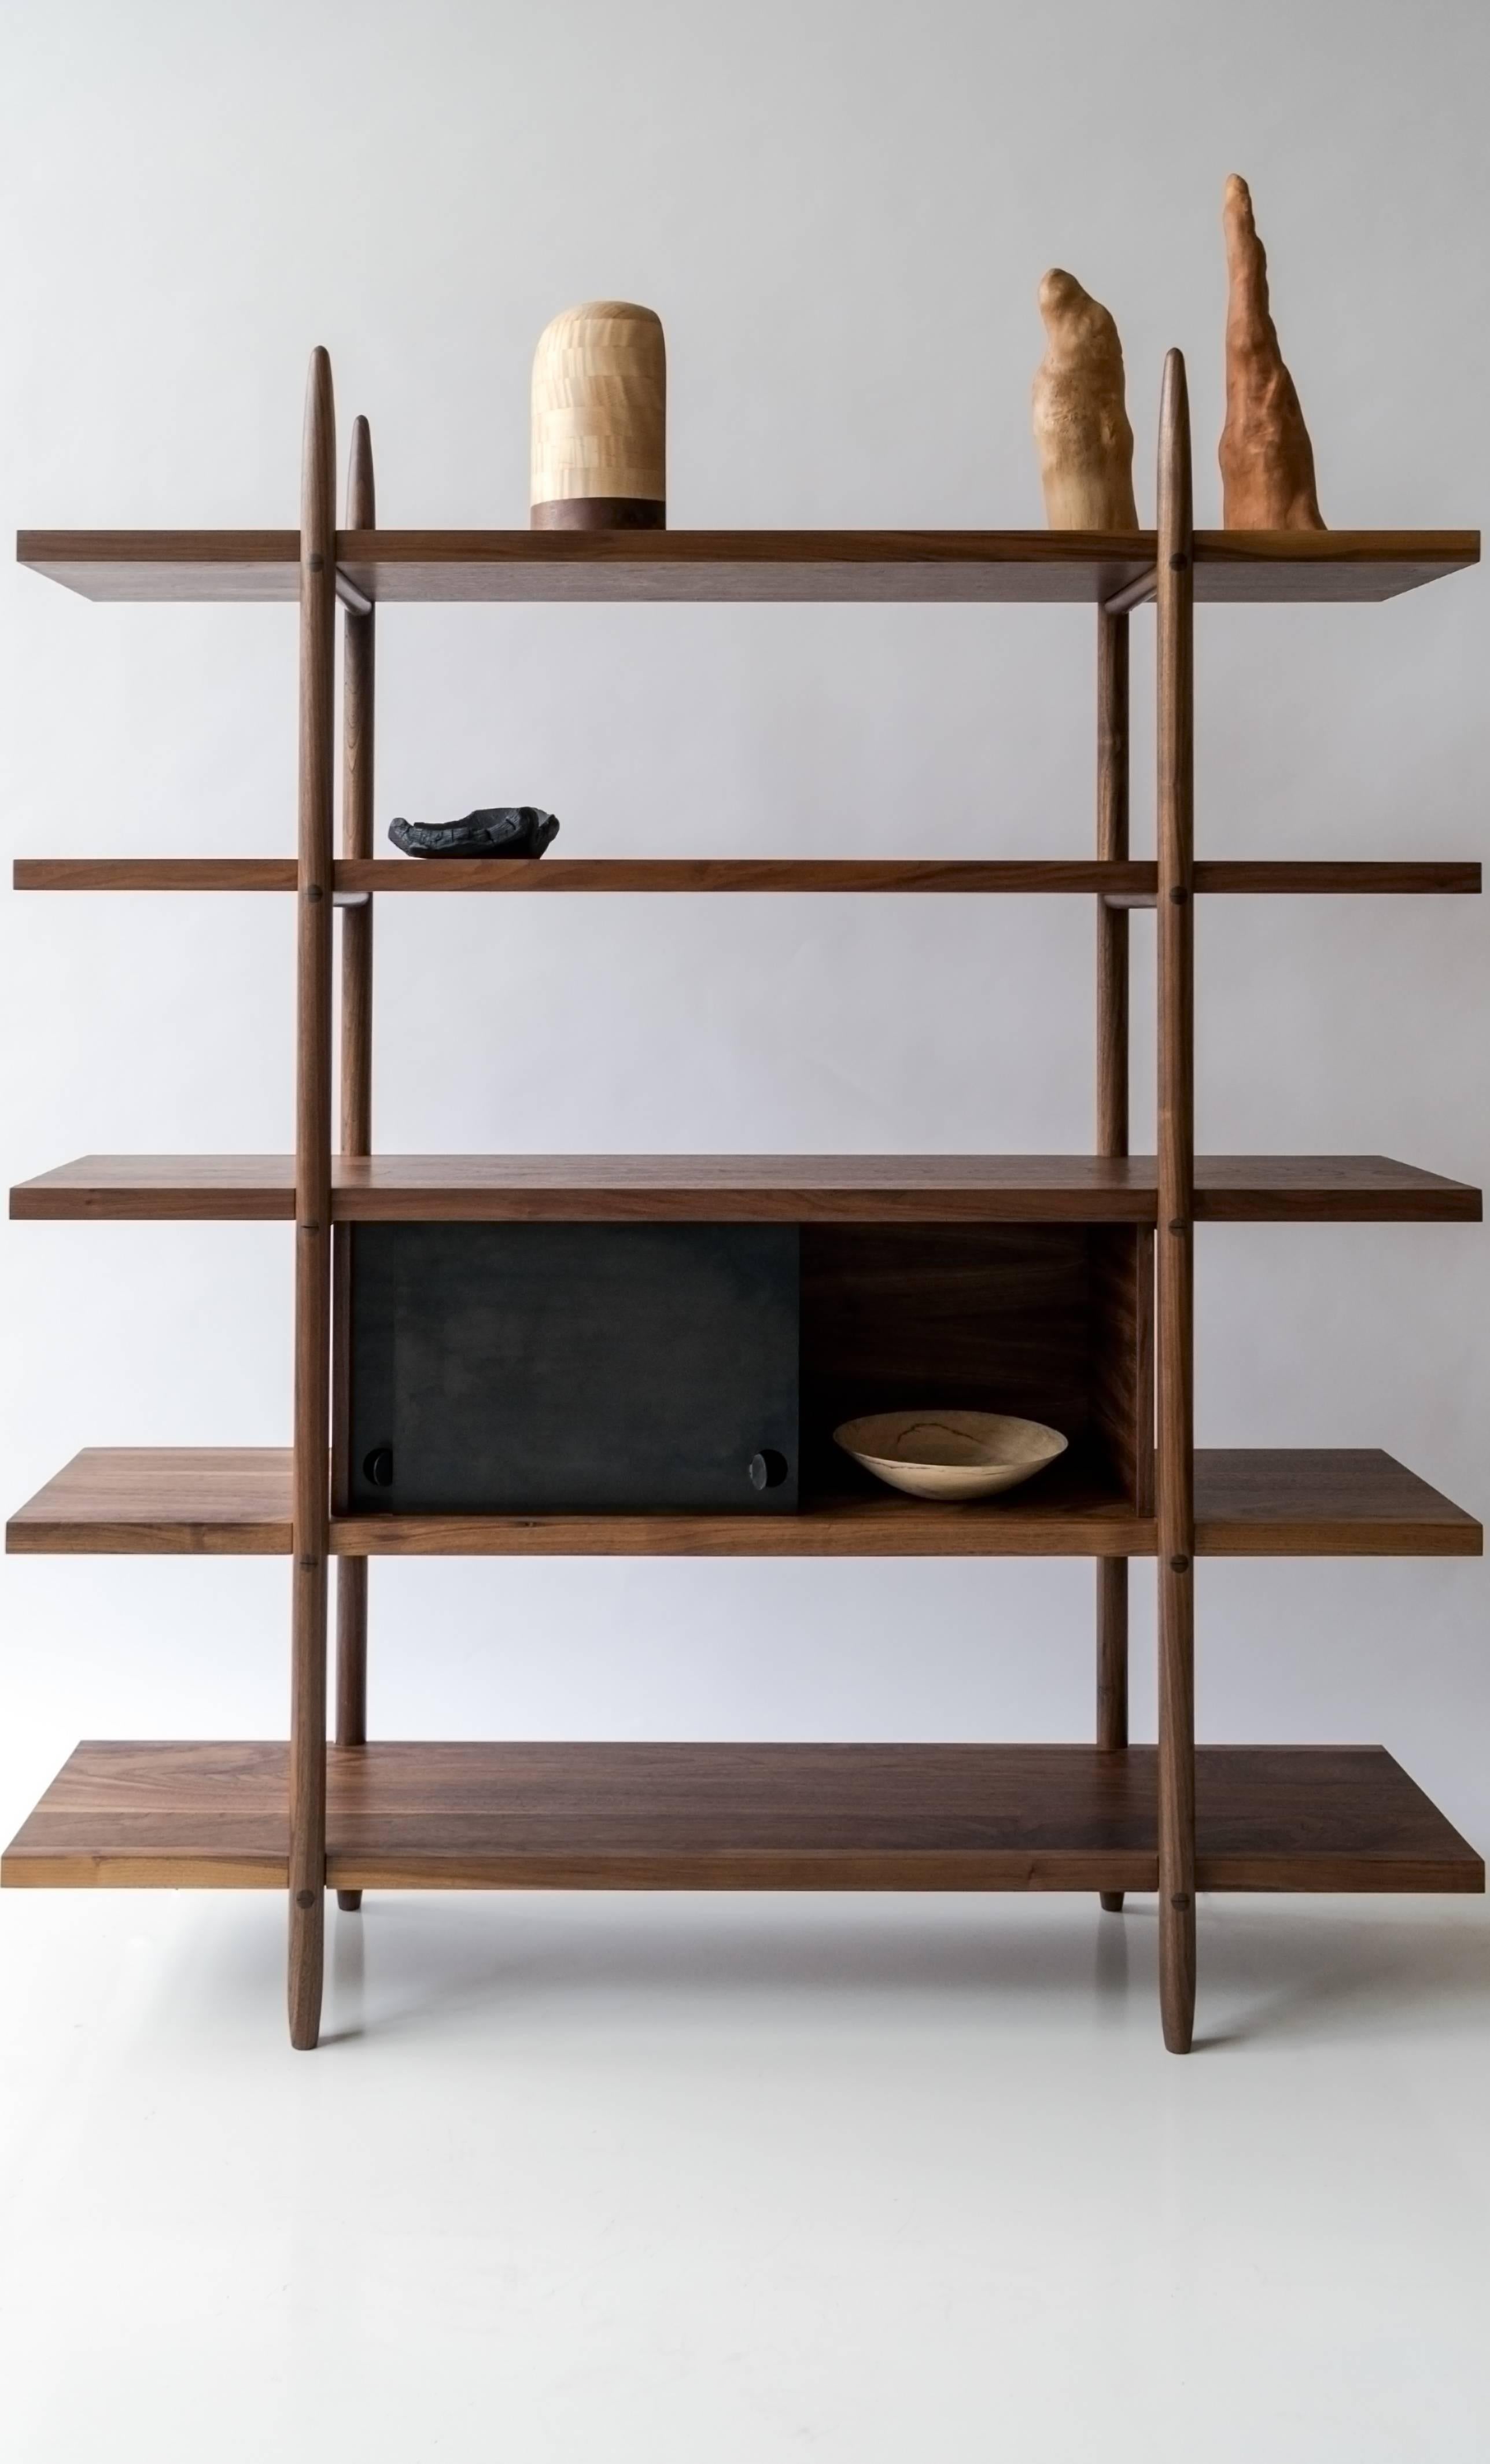 Bookshelf with beautiful wood detailing and clean, simple construction. Wedged tenon joinery and totally fastener free assembly. The Deepstep shelving goes together and comes apart easily for moving and can ship assembled or flatpack. Modular